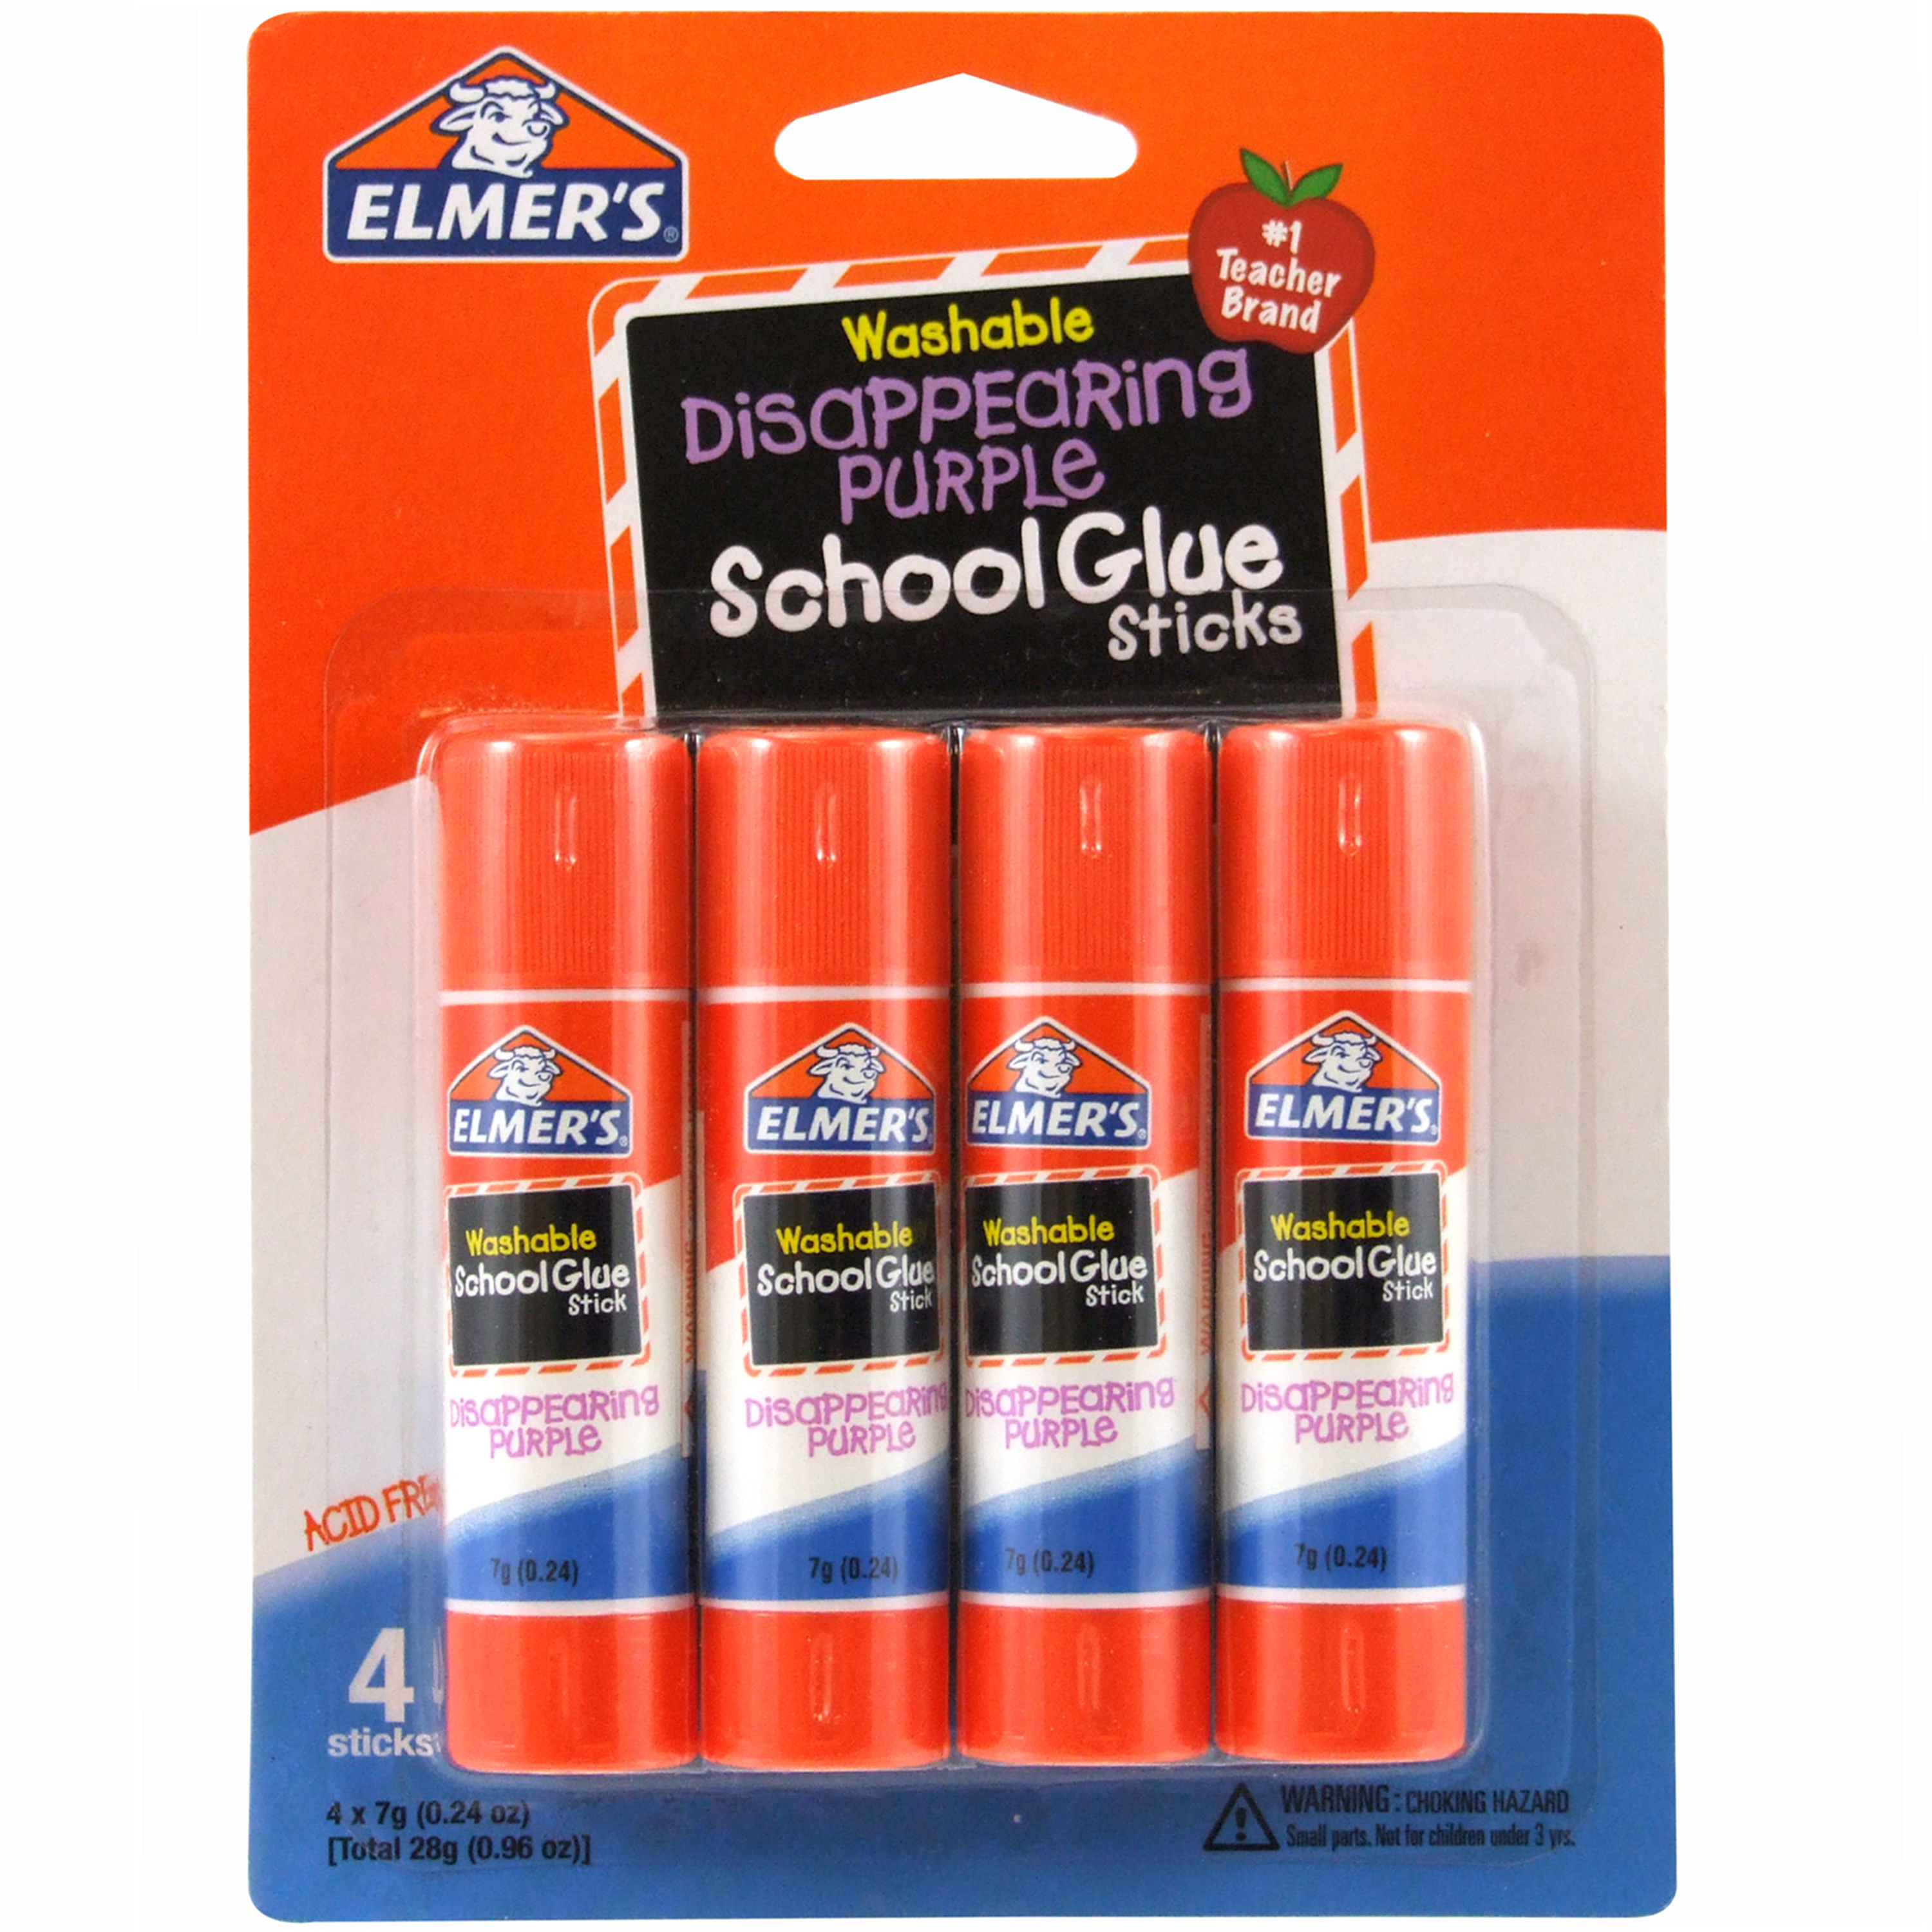 Elmer's Disappearing Purple School Glue Sticks, Washable, 7g (0.24 oz), 4 Count - image 1 of 5